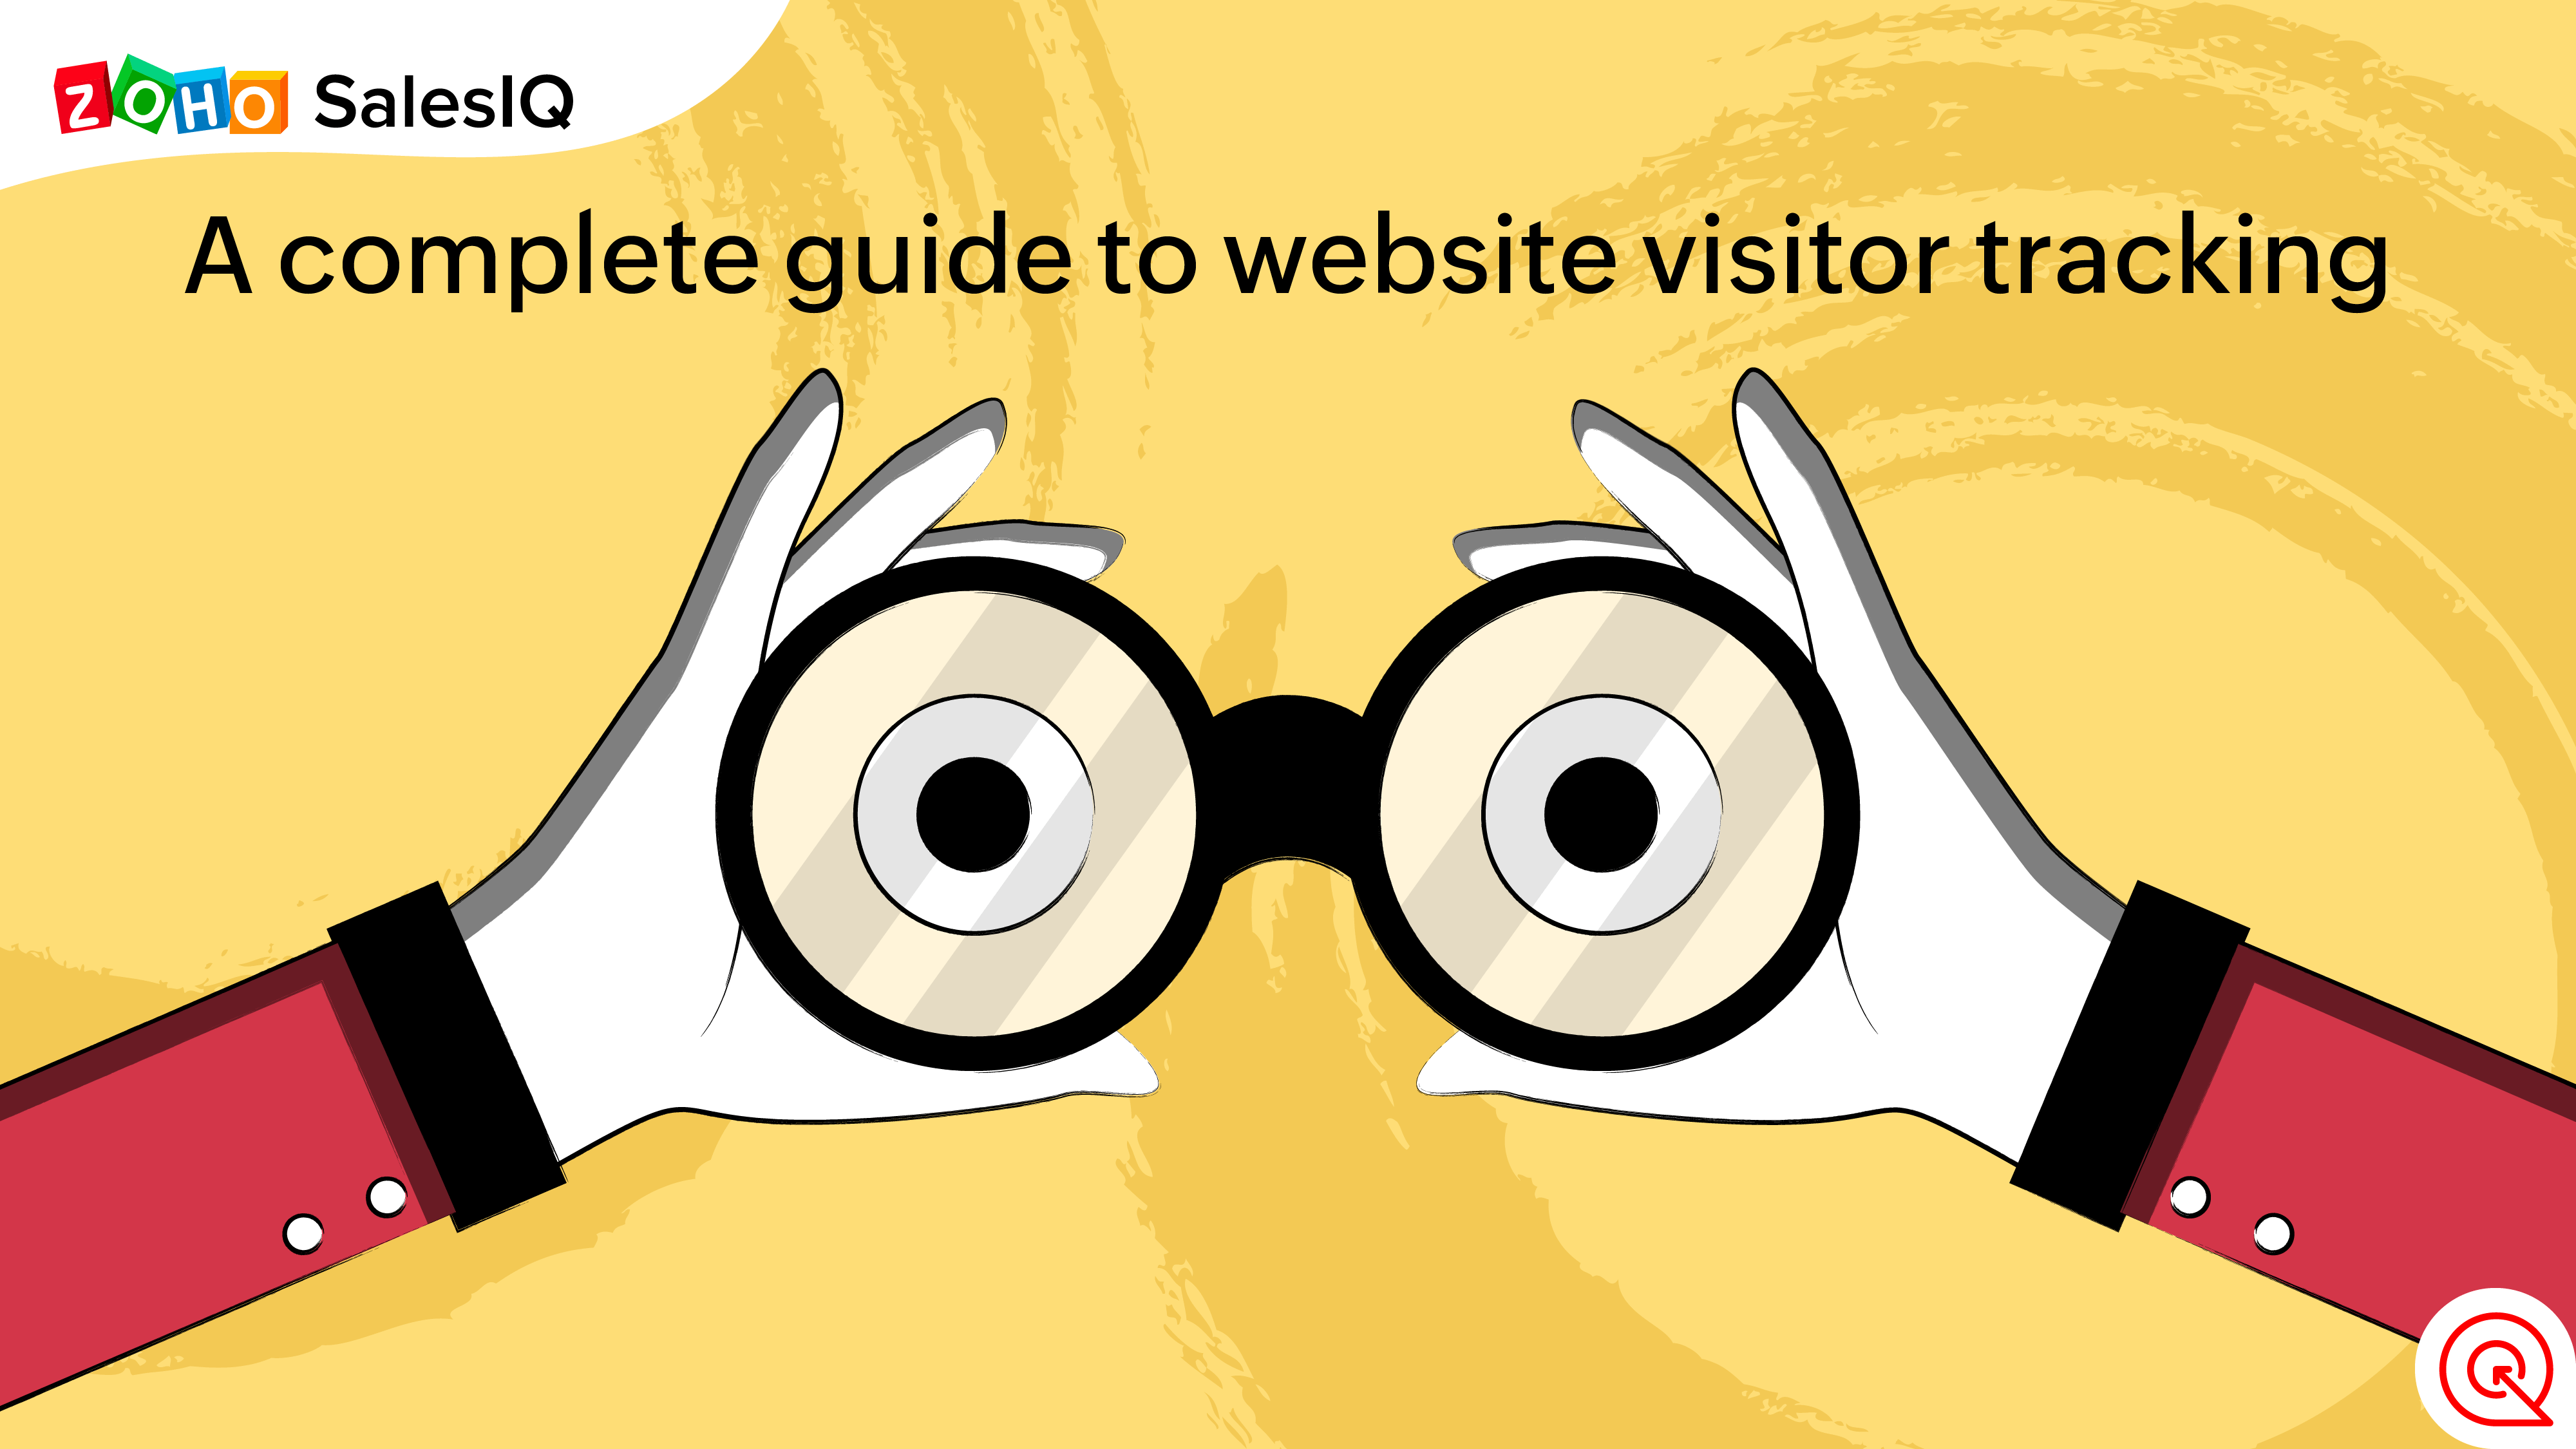 Website visitor tracking guide